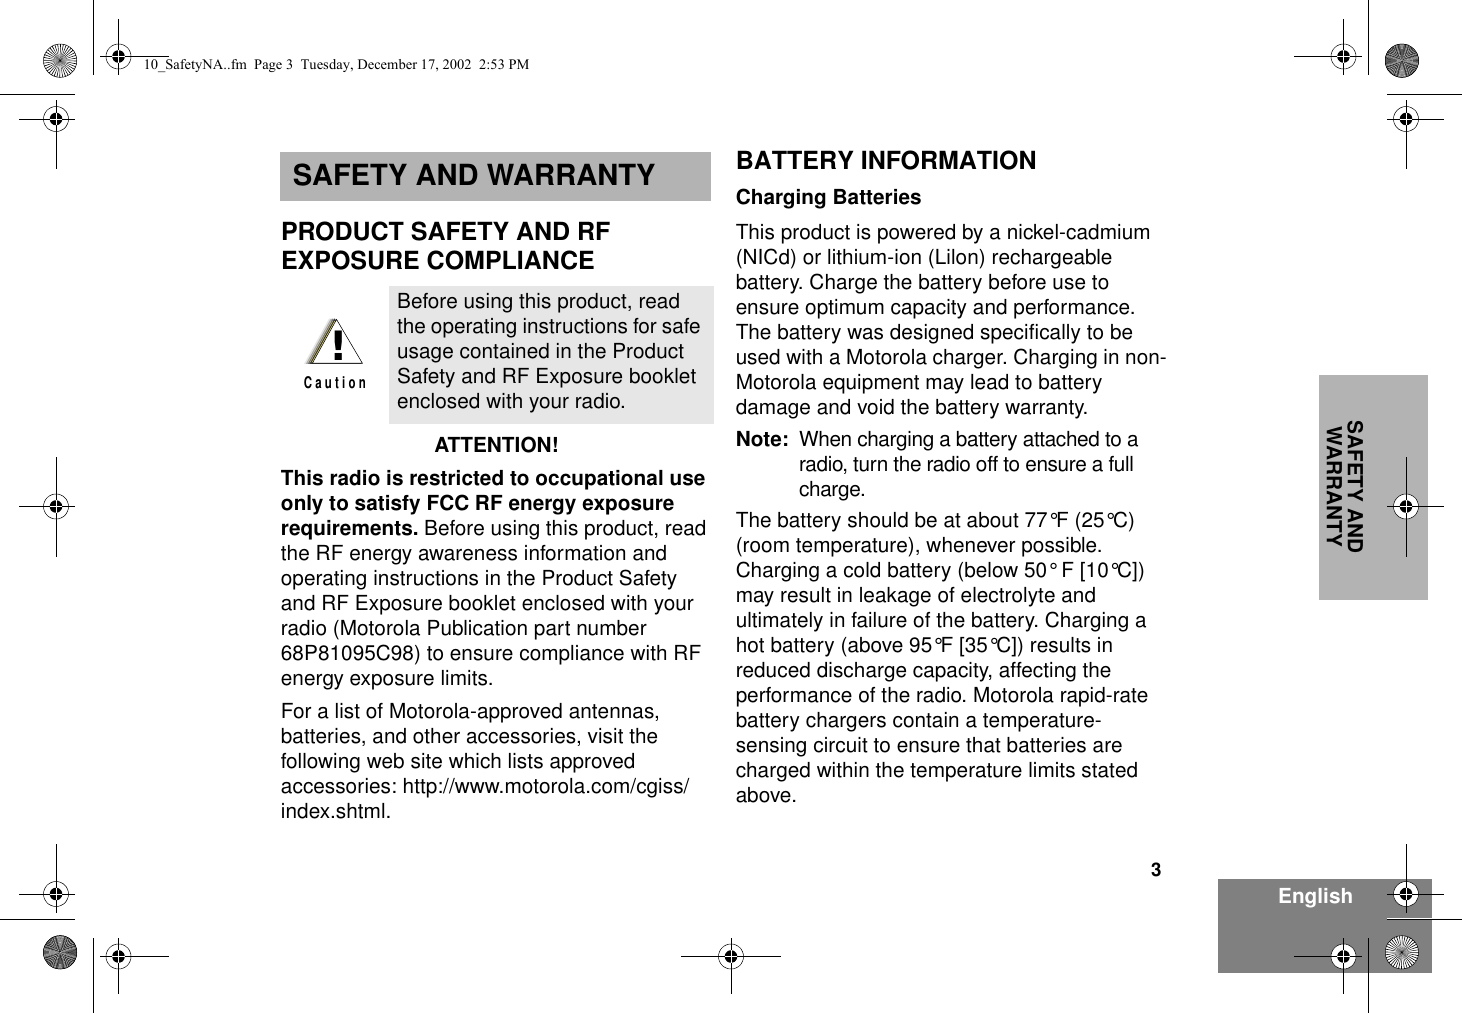 3EnglishSAFETY AND WARRANTYSAFETY AND WARRANTYPRODUCT SAFETY AND RF EXPOSURE COMPLIANCEATTENTION!  This radio is restricted to occupational use only to satisfy FCC RF energy exposure requirements. Before using this product, read the RF energy awareness information and operating instructions in the Product Safety and RF Exposure booklet enclosed with your radio (Motorola Publication part number 68P81095C98) to ensure compliance with RF energy exposure limits.  For a list of Motorola-approved antennas, batteries, and other accessories, visit the following web site which lists approved accessories: http://www.motorola.com/cgiss/index.shtml.BATTERY INFORMATIONCharging BatteriesThis product is powered by a nickel-cadmium (NICd) or lithium-ion (Lilon) rechargeable battery. Charge the battery before use to ensure optimum capacity and performance. The battery was designed specifically to be used with a Motorola charger. Charging in non-Motorola equipment may lead to battery damage and void the battery warranty.Note: When charging a battery attached to a radio, turn the radio off to ensure a full charge.The battery should be at about 77°F (25°C) (room temperature), whenever possible. Charging a cold battery (below 50° F [10°C]) may result in leakage of electrolyte and ultimately in failure of the battery. Charging a hot battery (above 95°F [35°C]) results in reduced discharge capacity, affecting the performance of the radio. Motorola rapid-rate battery chargers contain a temperature-sensing circuit to ensure that batteries are charged within the temperature limits stated above.Before using this product, read the operating instructions for safe usage contained in the Product Safety and RF Exposure booklet enclosed with your radio.!C a u t i o n10_SafetyNA..fm  Page 3  Tuesday, December 17, 2002  2:53 PM